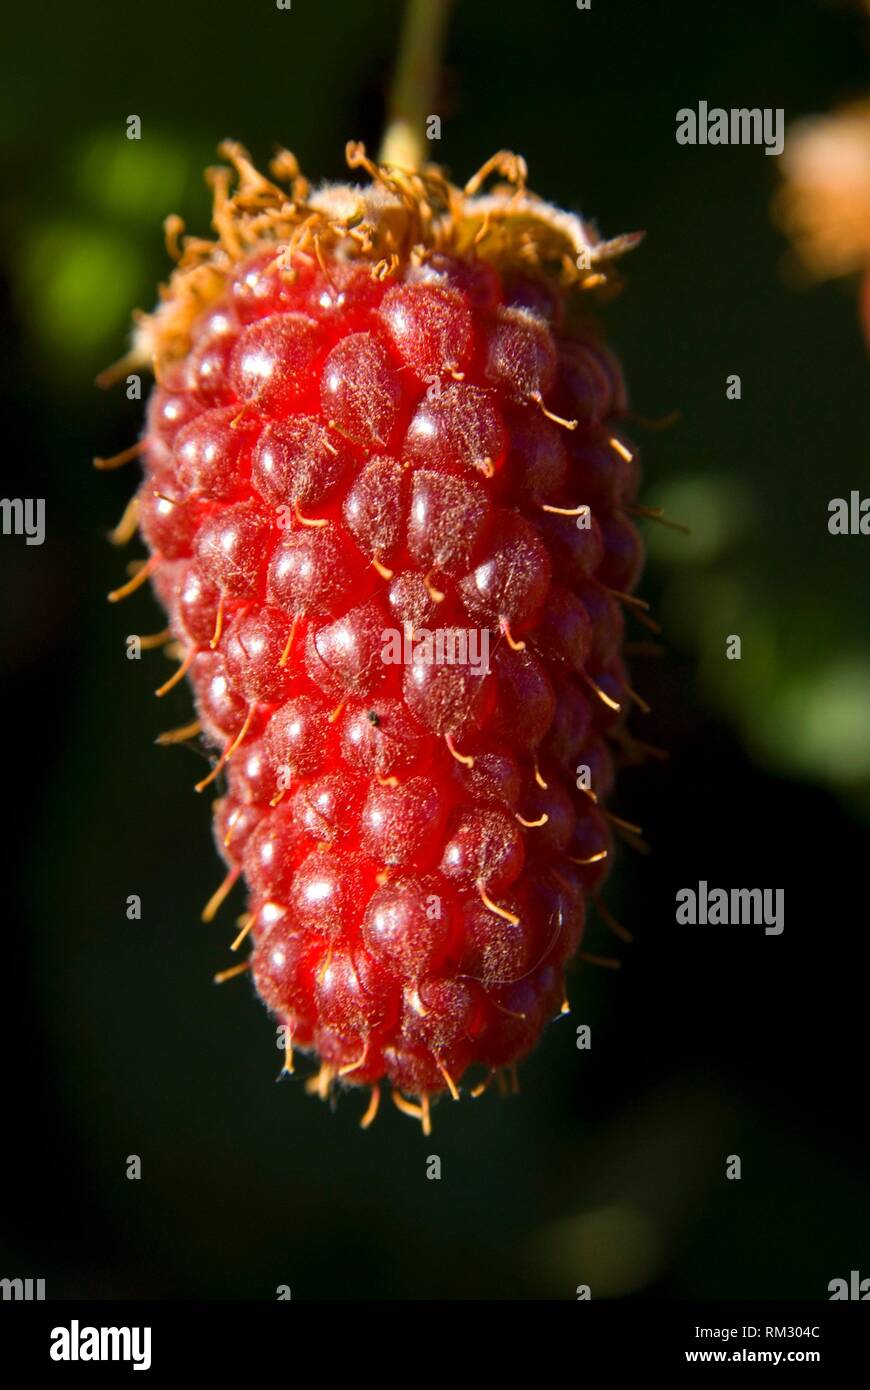 Tayberry (mix between raspberry and blackberry), Marion County, Oregon. Stock Photo